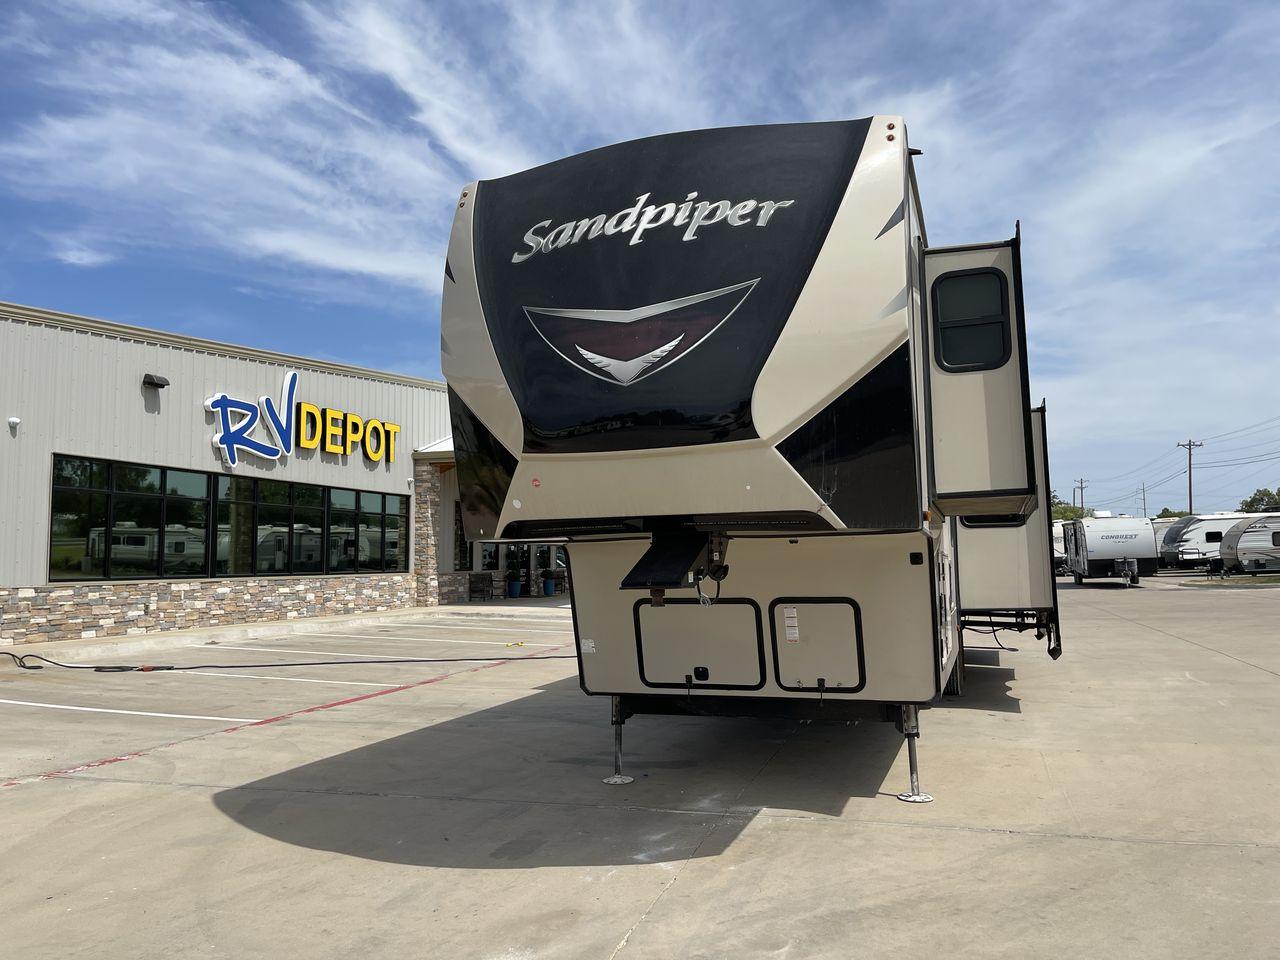 2020 TAN FOREST RIVER SANDPIPER 384QBOK (4X4FSAP25LJ) , Length: 41.67 ft. | Dry Weight: 13,132 lbs. | Gross Weight: 16,132 lbs. | Slides: 5 transmission, located at 4319 N Main St, Cleburne, TX, 76033, (817) 678-5133, 32.385960, -97.391212 - RV Depot in Cleburne, TX is proud to present this stunning 2020 Forest River Sandpiper 384QBOK for sale. With its luxurious features and spacious interior, this fifth wheel bunk house is the perfect vehicle for your next adventure. Priced at $67,995, this RV offers exceptional value for money. Loca - Photo #0